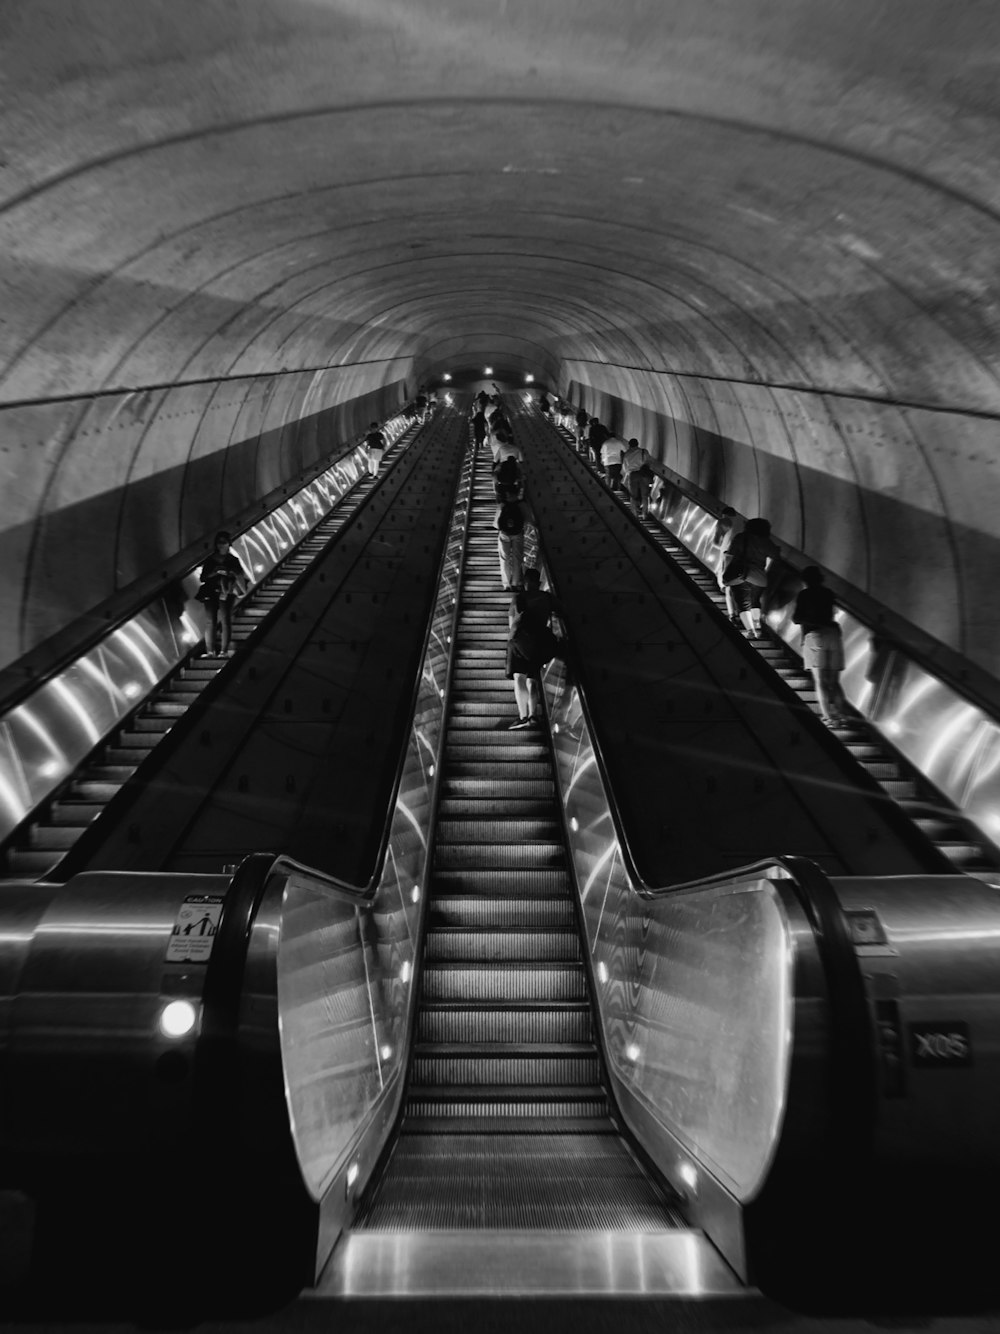 grayscale photography of escalators with no people